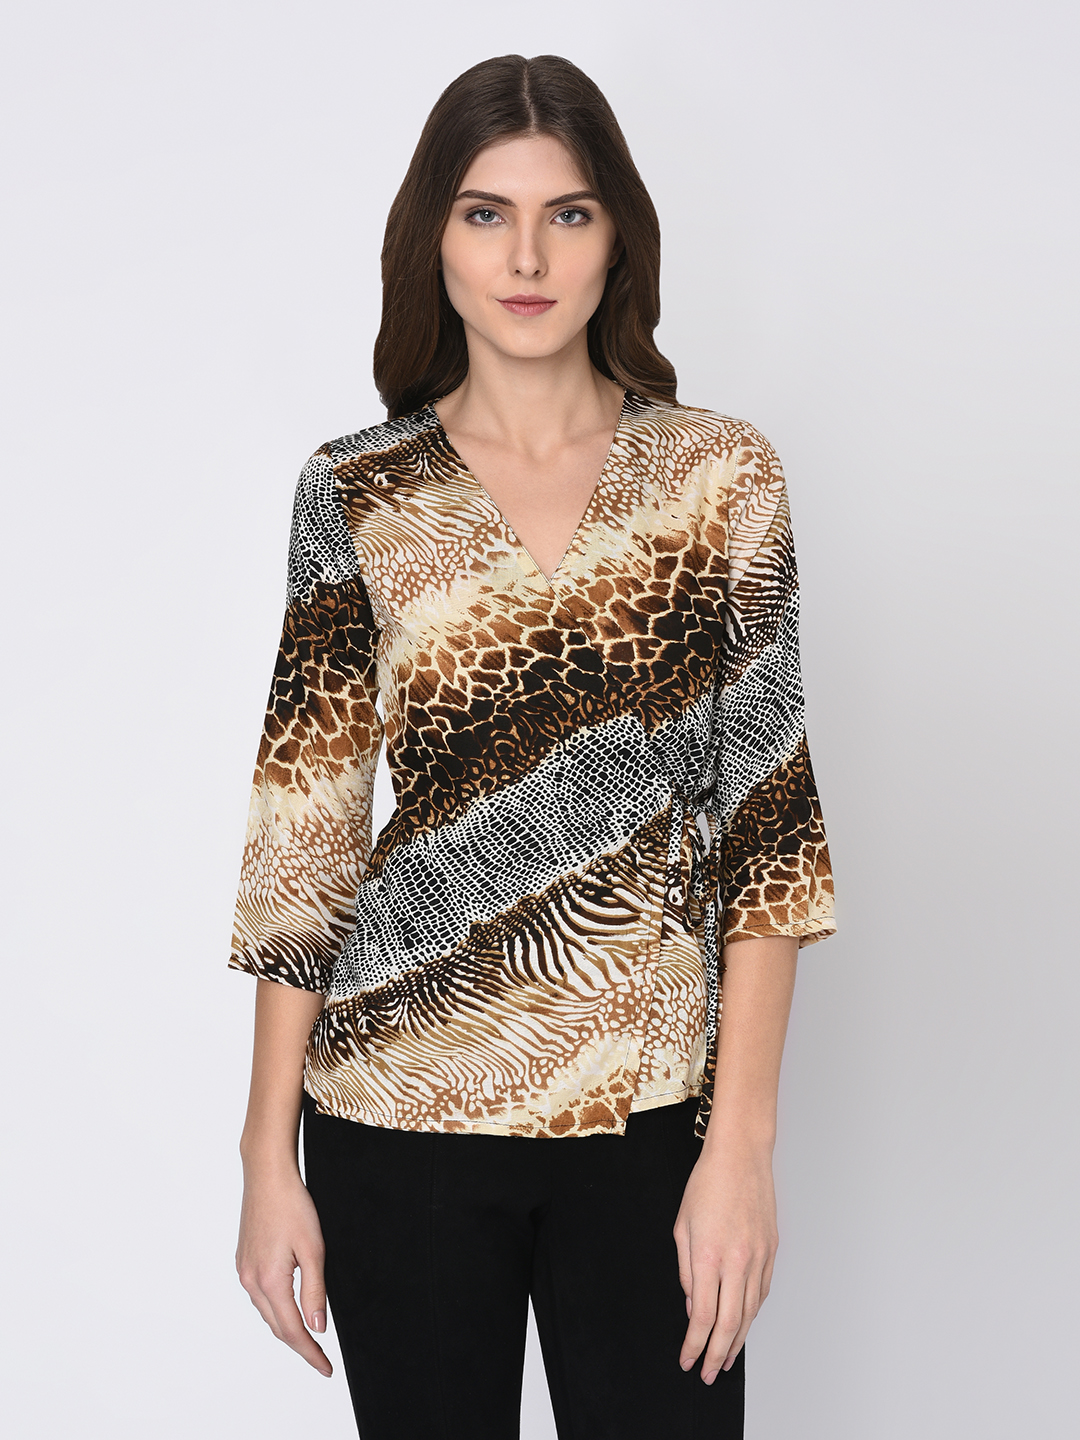 Product image - We offer fashionable Womens Tops in multiple options and fabric.